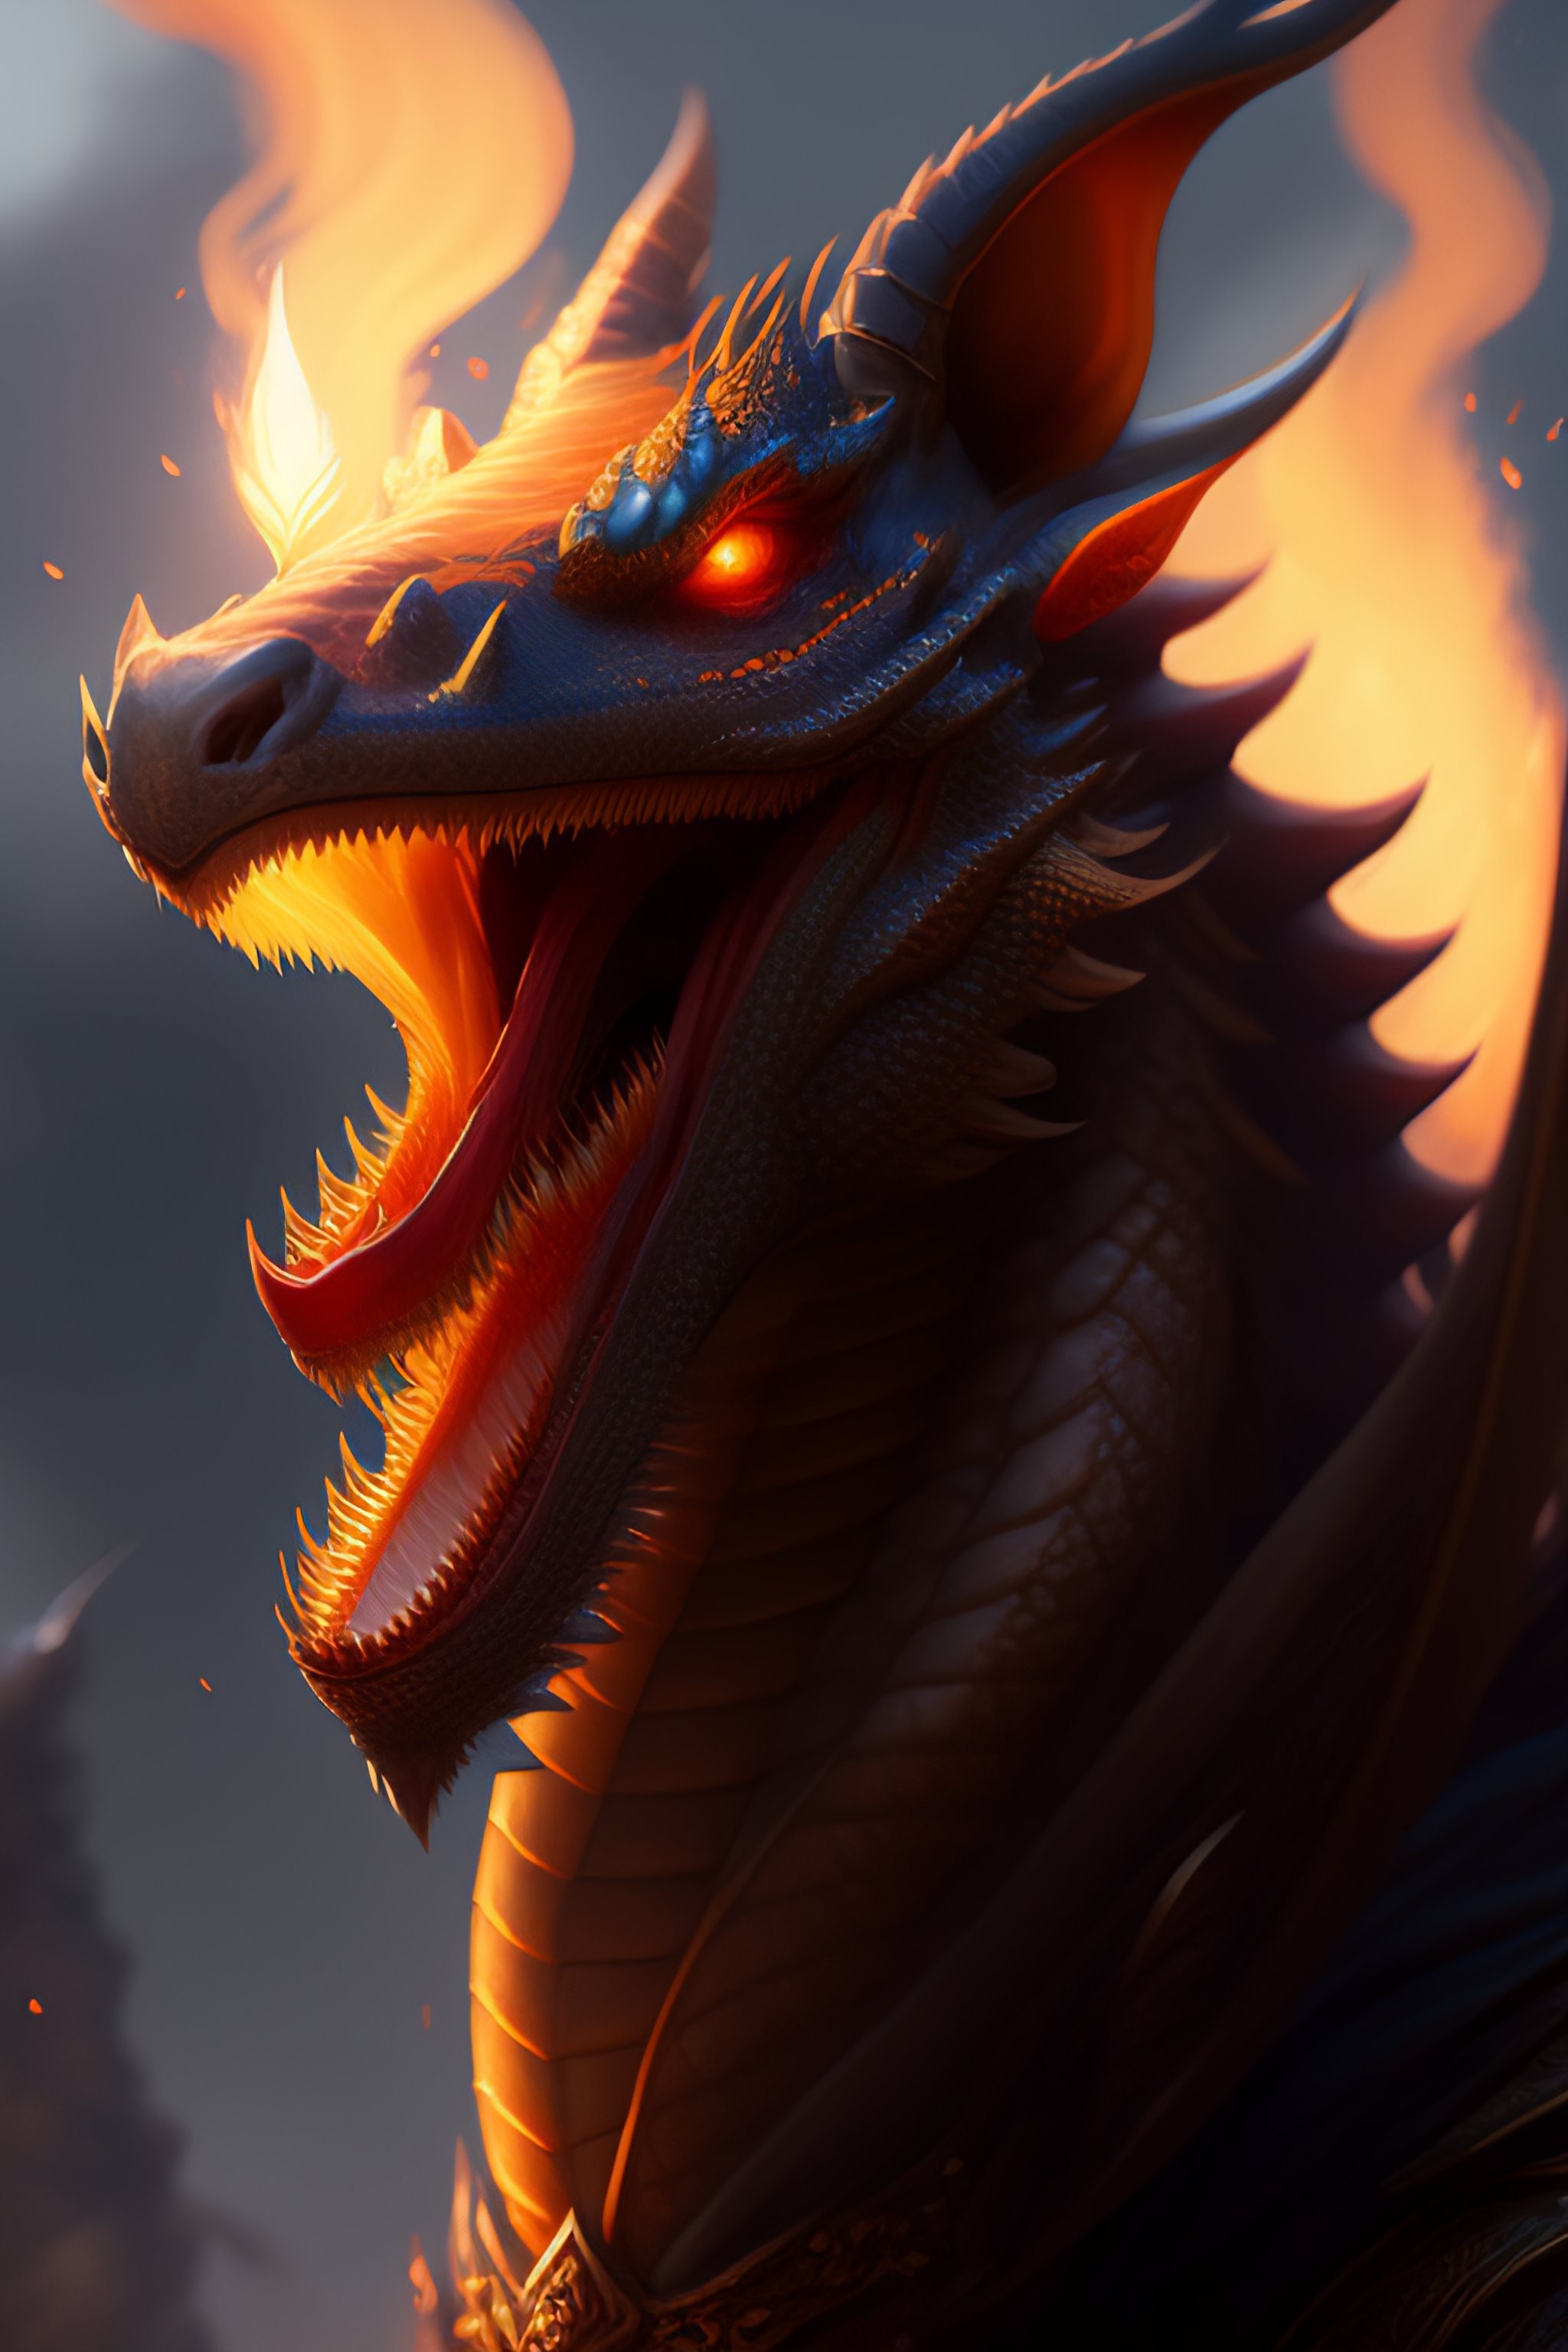 Lexica A Detailed Portrait Of Dragon Breathing Fire Illustrator By Justin Gerard And Greg 1084